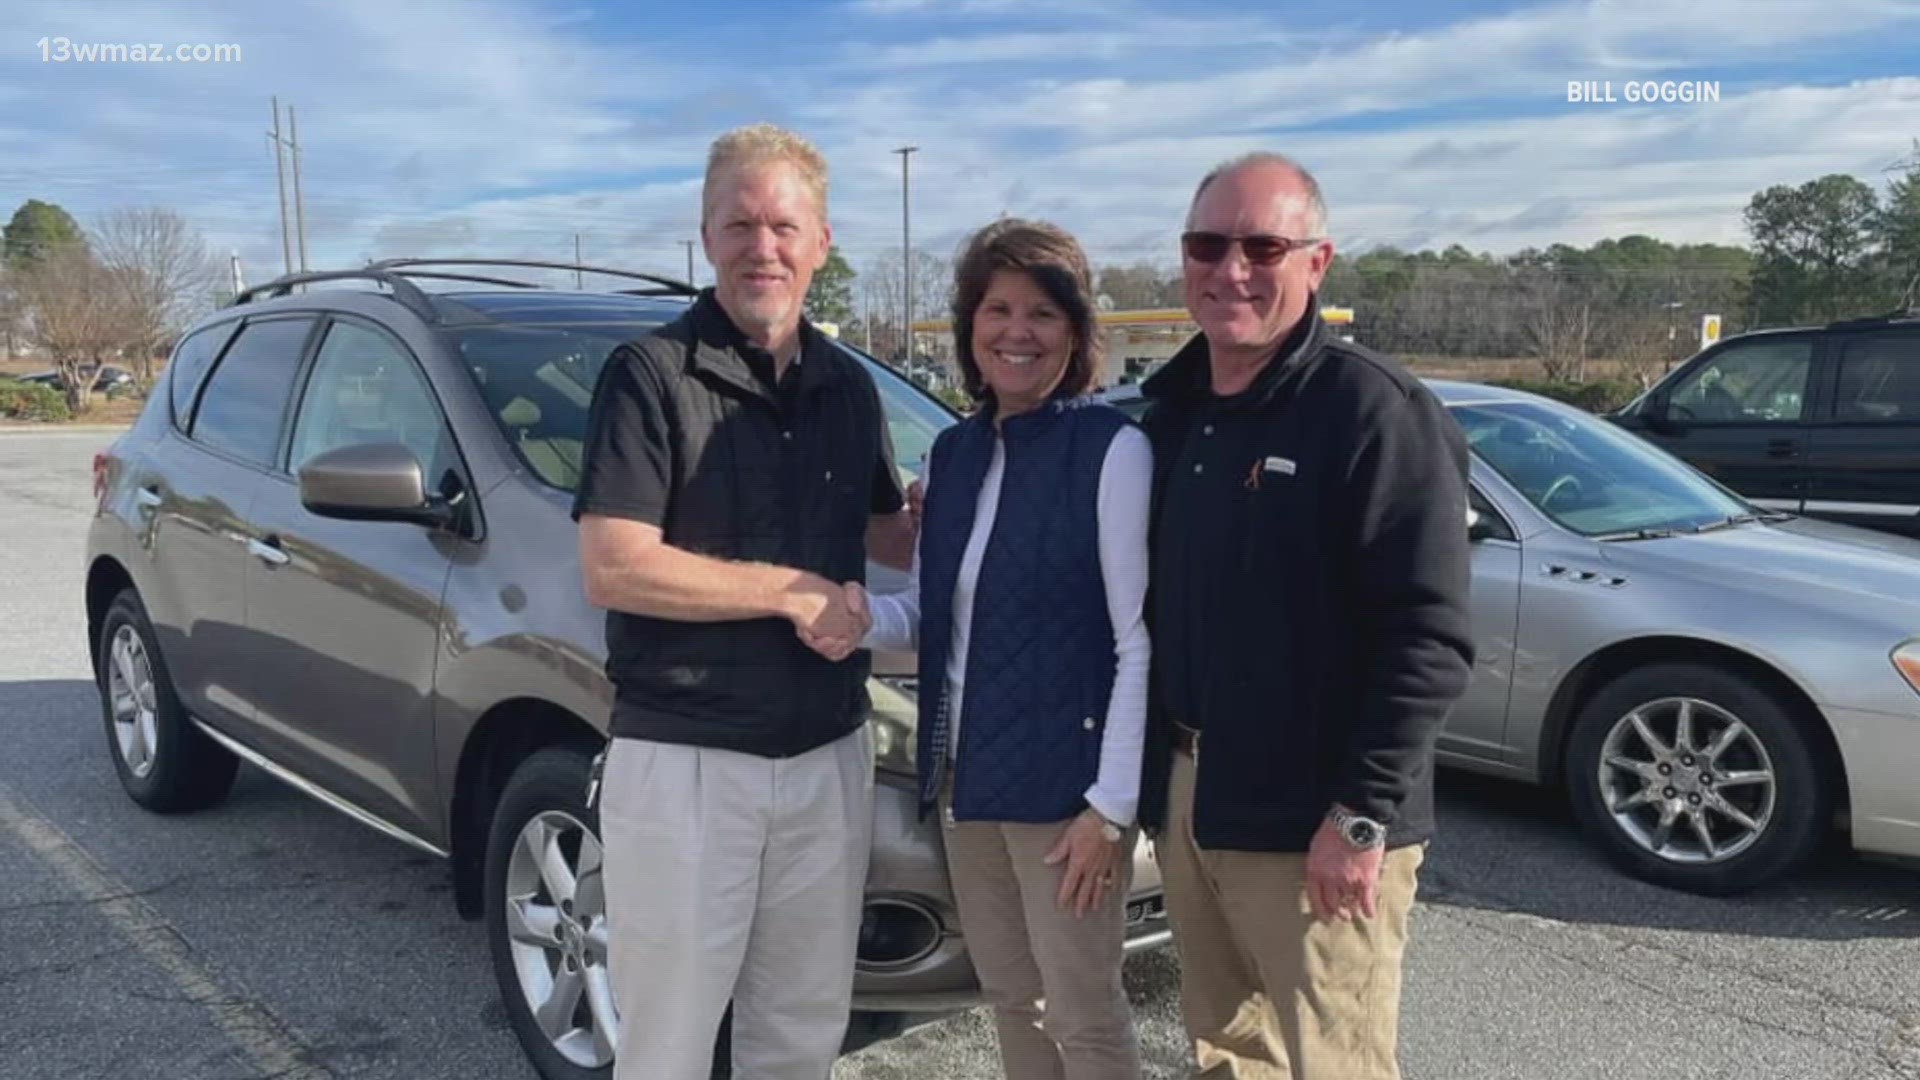 Habitat for Humanity's Cars for Homes program allows people to donate their cars and have the sale proceeds go towards building homes for those in need.